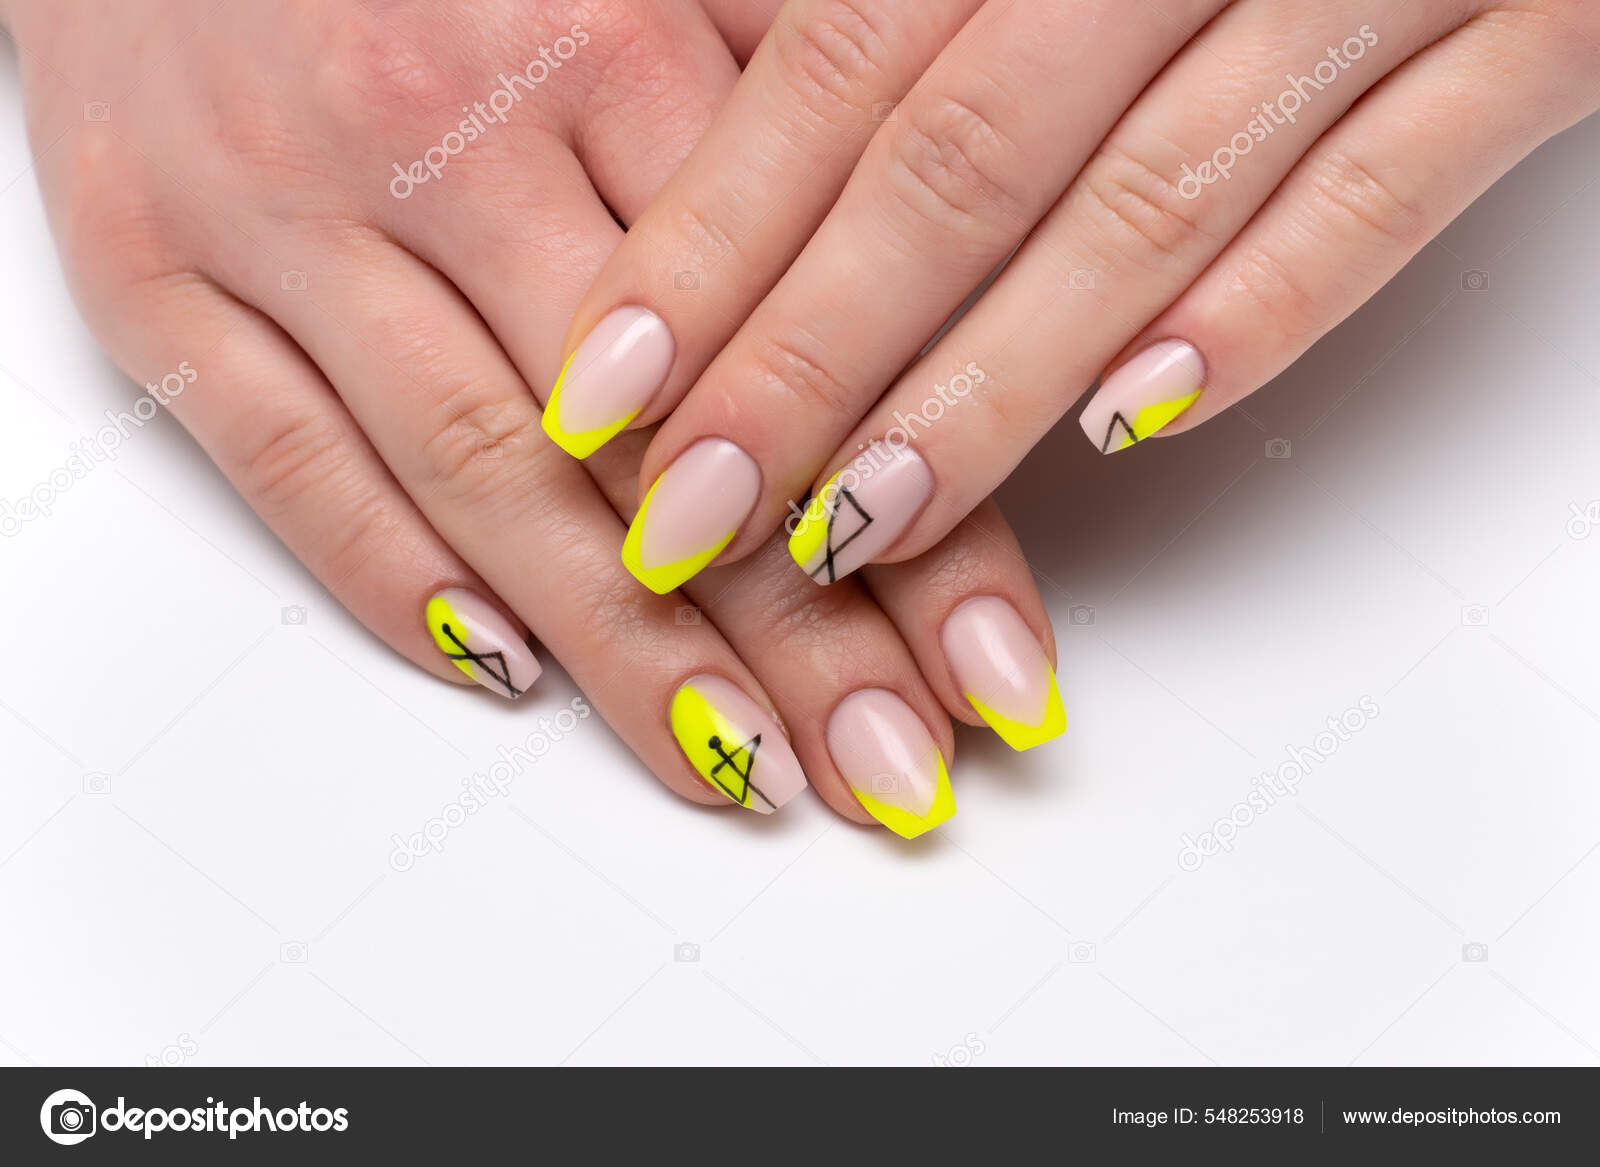 Summer Nails - BLACK AND YELLOW SUNFLOWER NAILS First up we have a chic and  vibrant sunflower nail design to show you. Three of the nails are bright  sunshine yellow while two